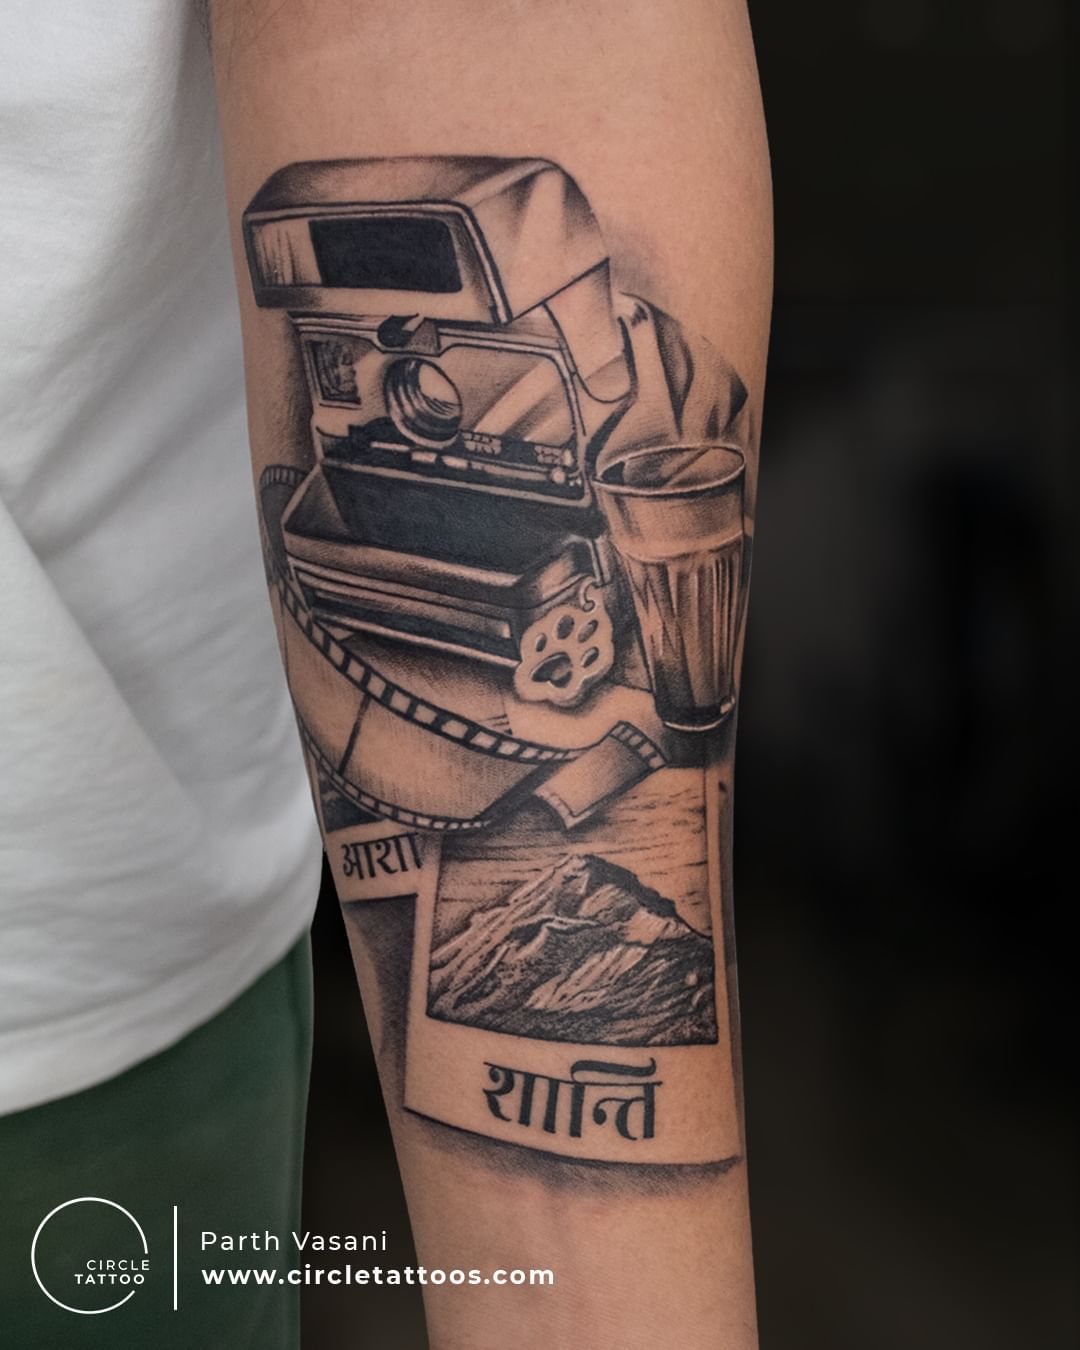 Skin Pricks Tattoo Studio on Twitter RTnagar bangalore india  karnataka customtattoo Lovedone at Skin Pricks Tattoo Studio Pruthvi  Minty ur views Comments and shares would be Appreciated CONTACT  Private message on Facebook